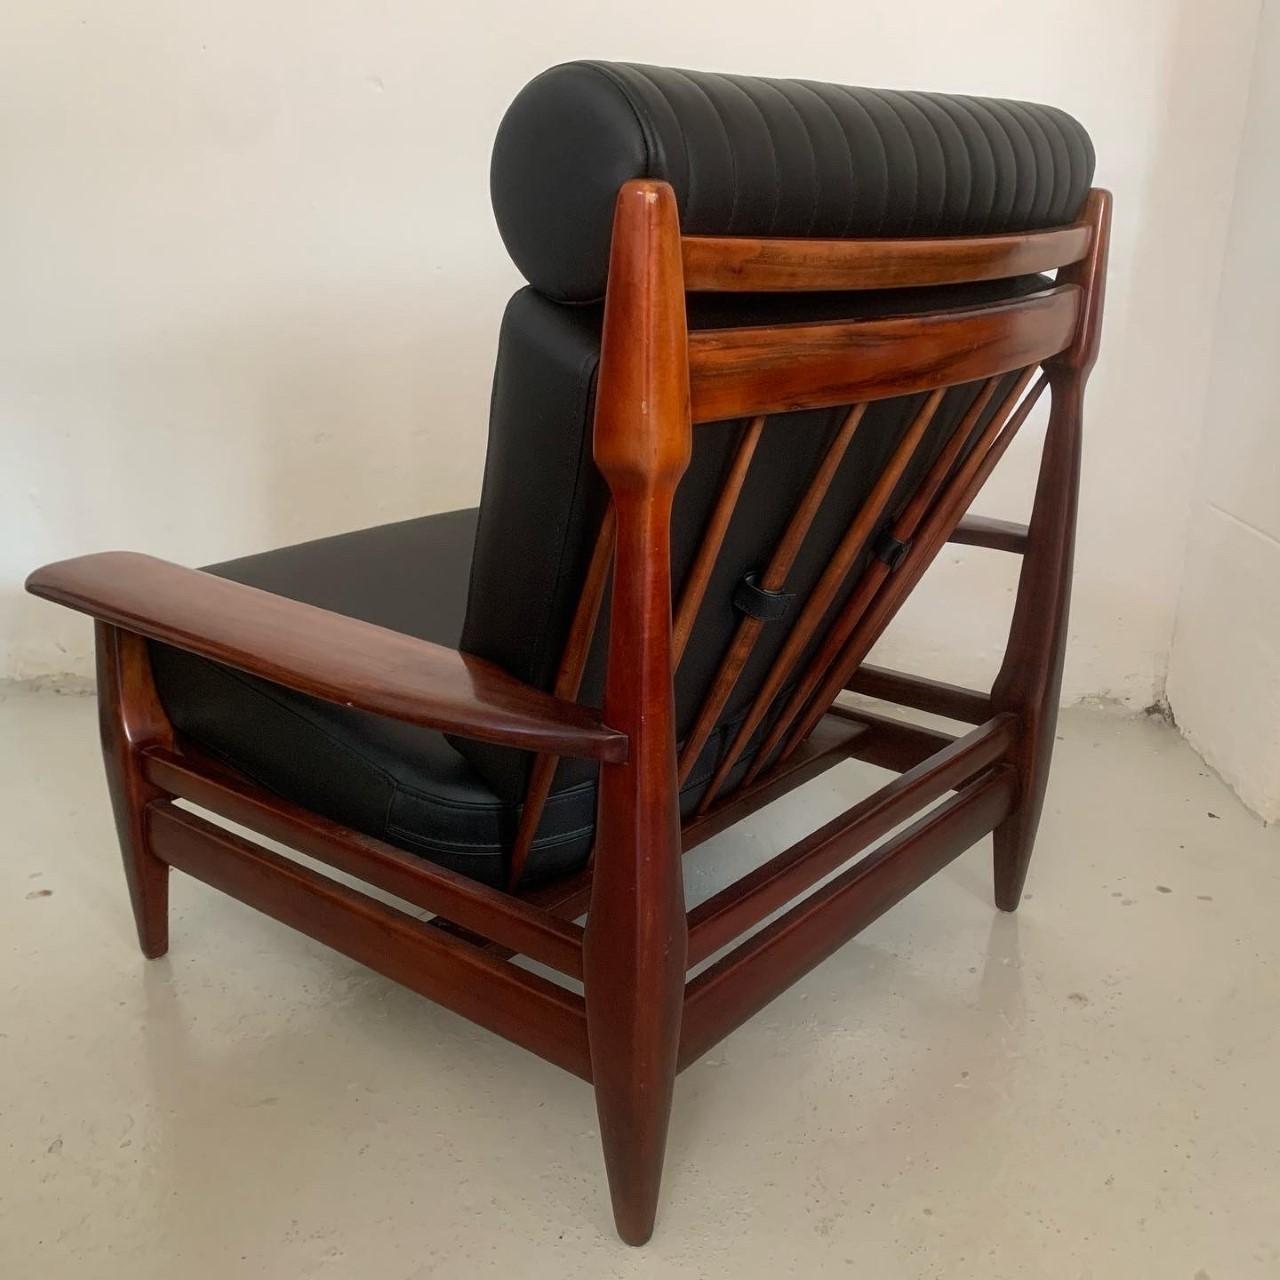 Mid-20th Century Brazilian Brutalist Rosewood and Leather Lounge Chair by Jean Gillon For Sale